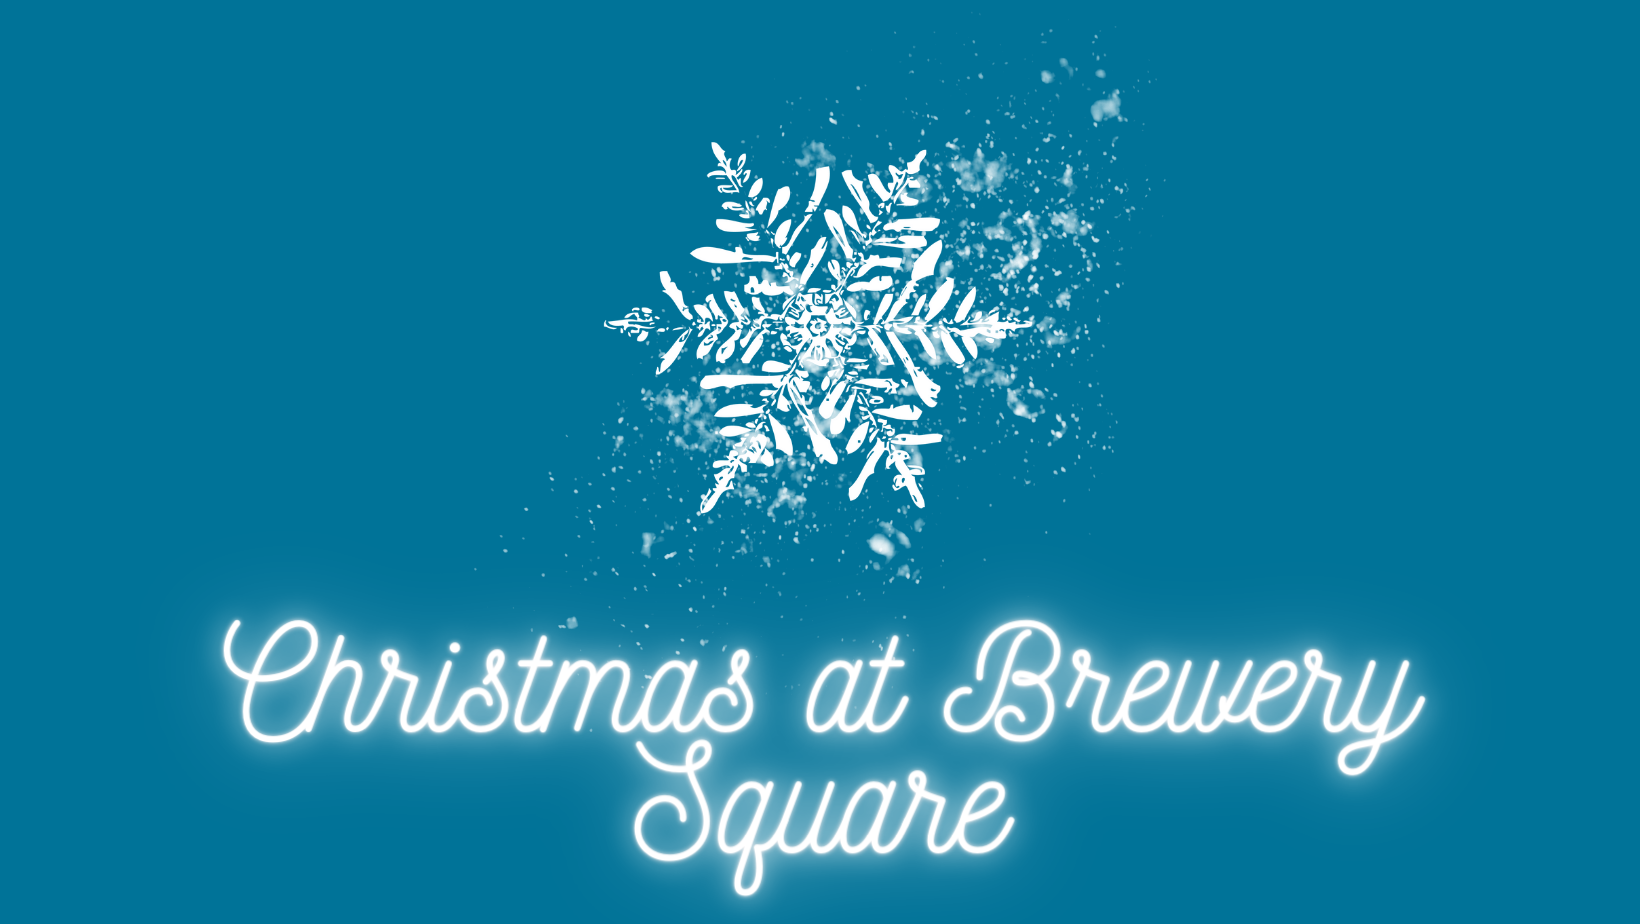 Christmas at Brewery Square